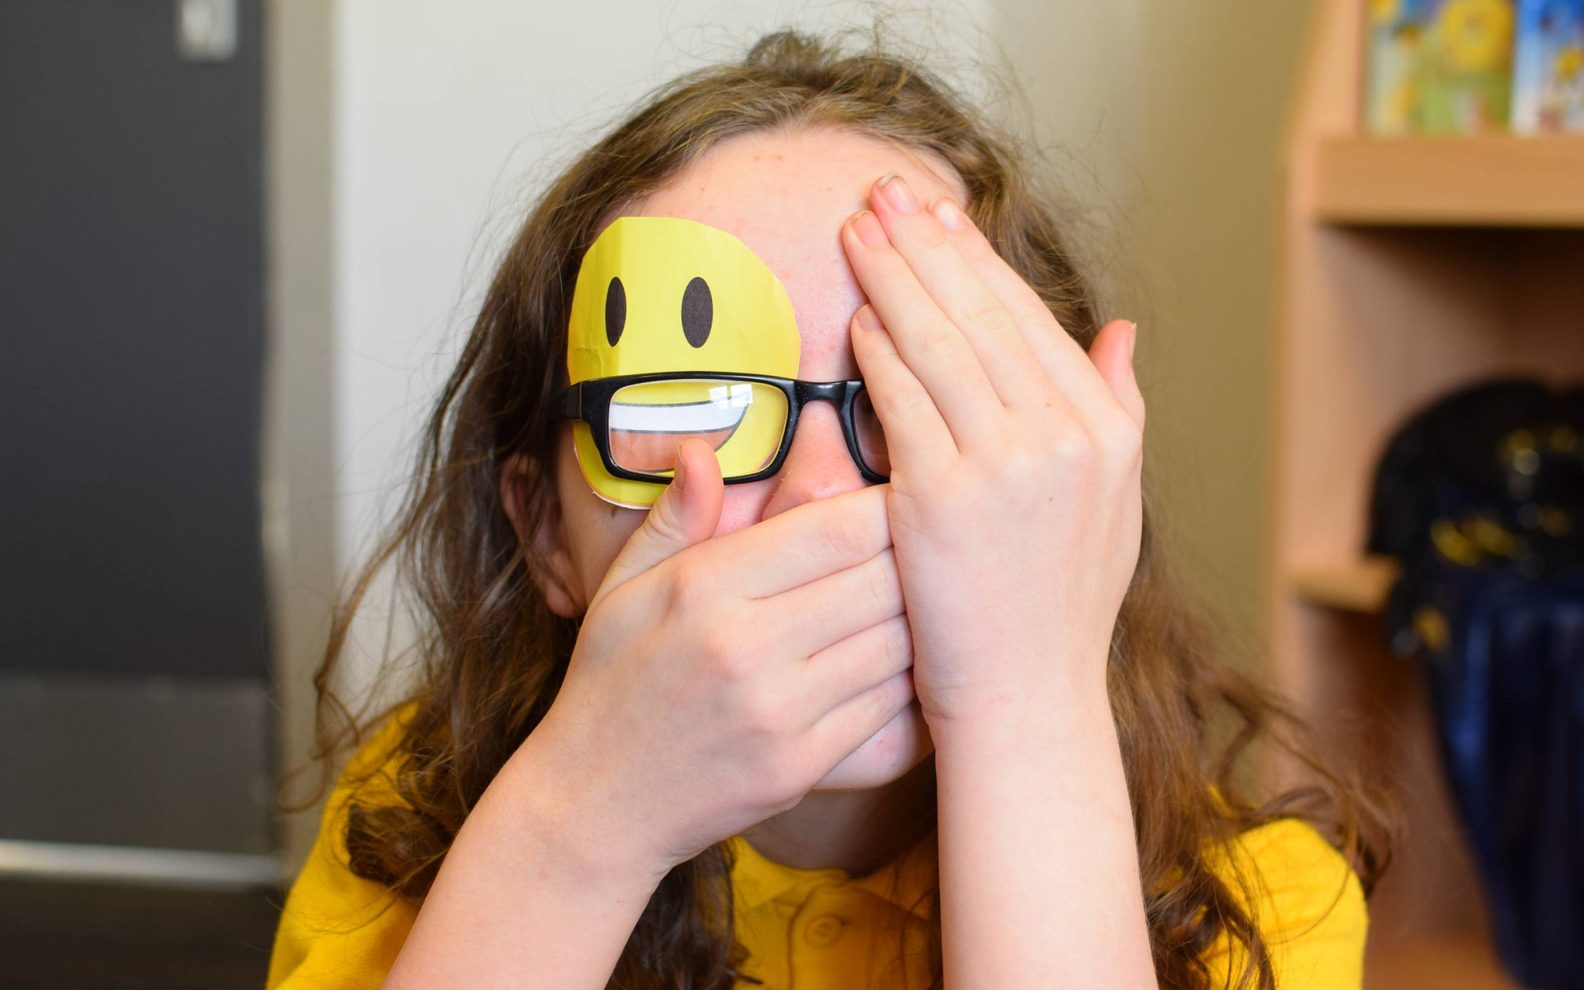 A young girl is looking at the camera. She has a yellow smiley face covering one eye. She is covering the other eye with her hand. She is covering her mouth with her hand.